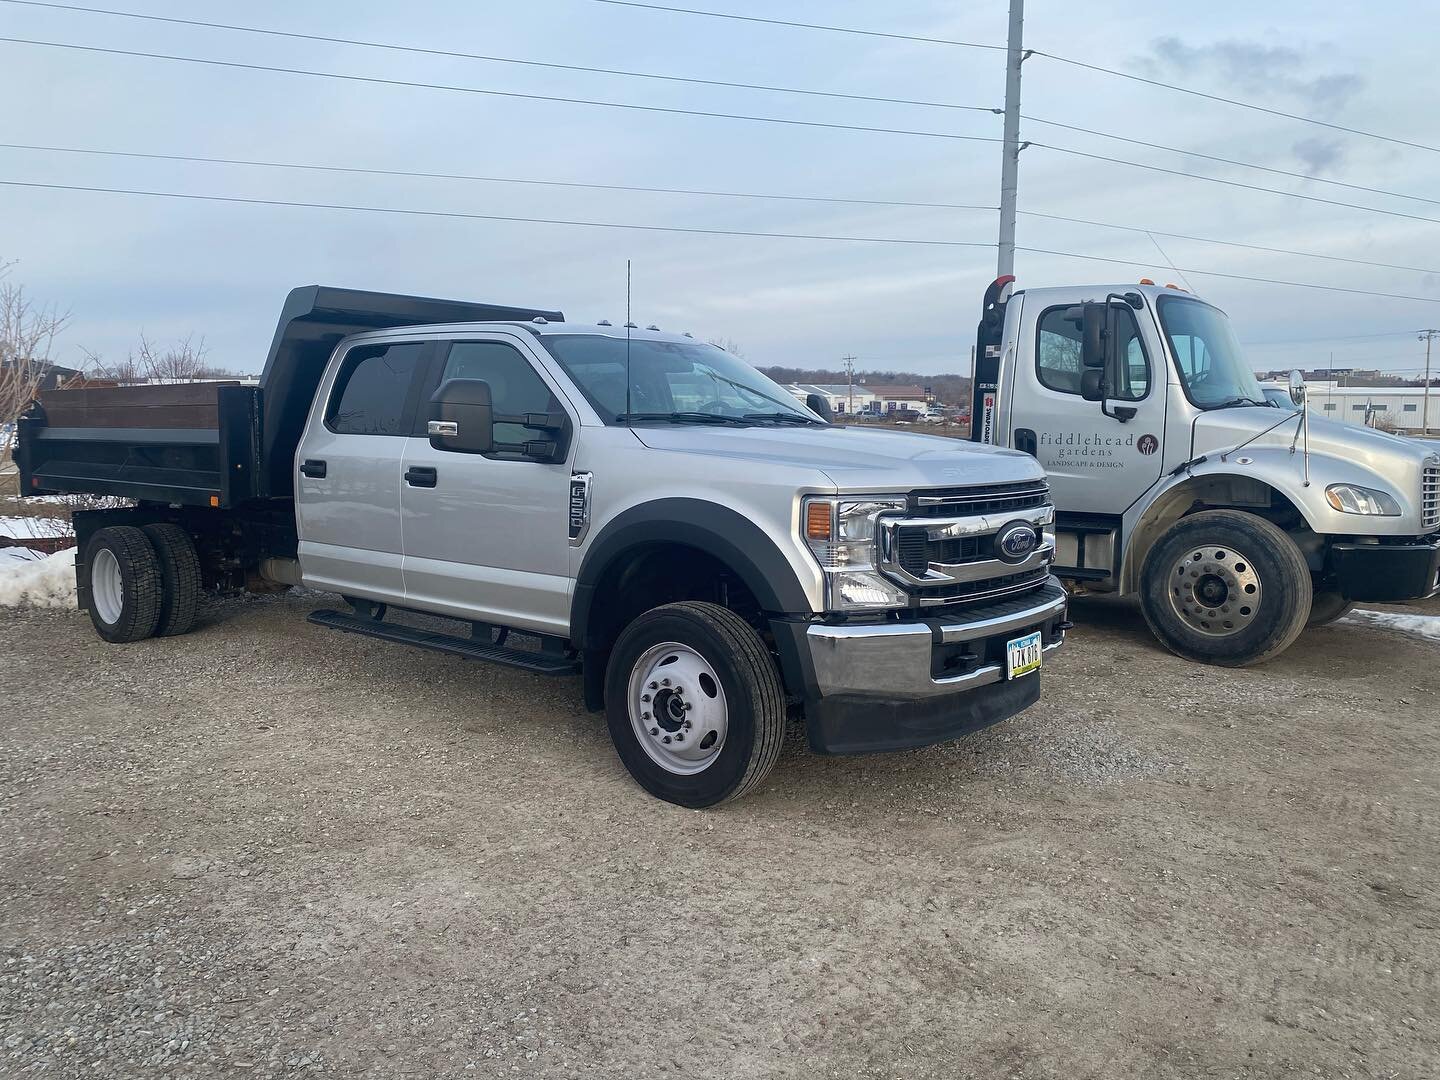 Our brand is to have silver truck all matching. This f550 just got out of the paint booth and we look forward to the new logos coming up. Welcome to the team truck #6!!!